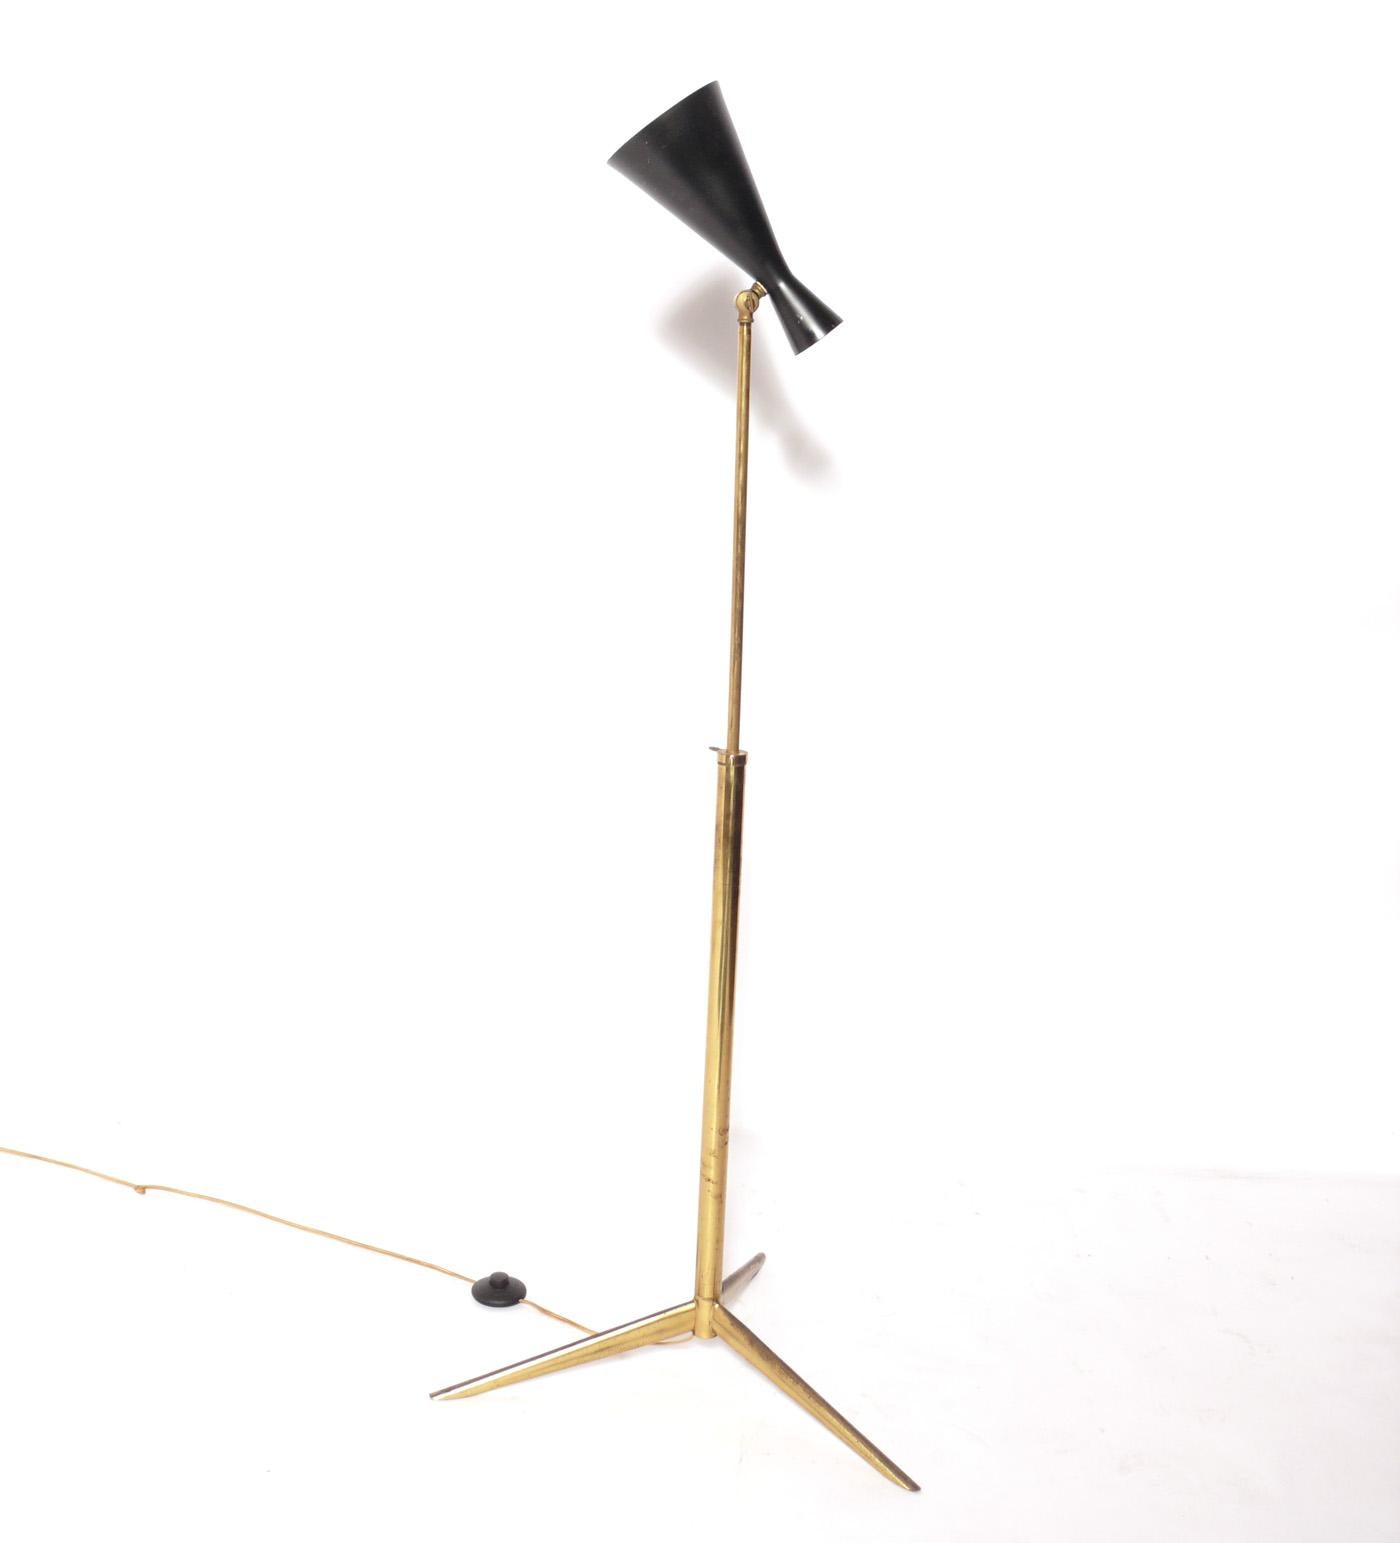 Italian mid century brass floor lamp, Italy, circa 1950s. Adjustable height and shade. Retains warm original patina. It has been rewired and is ready to use.